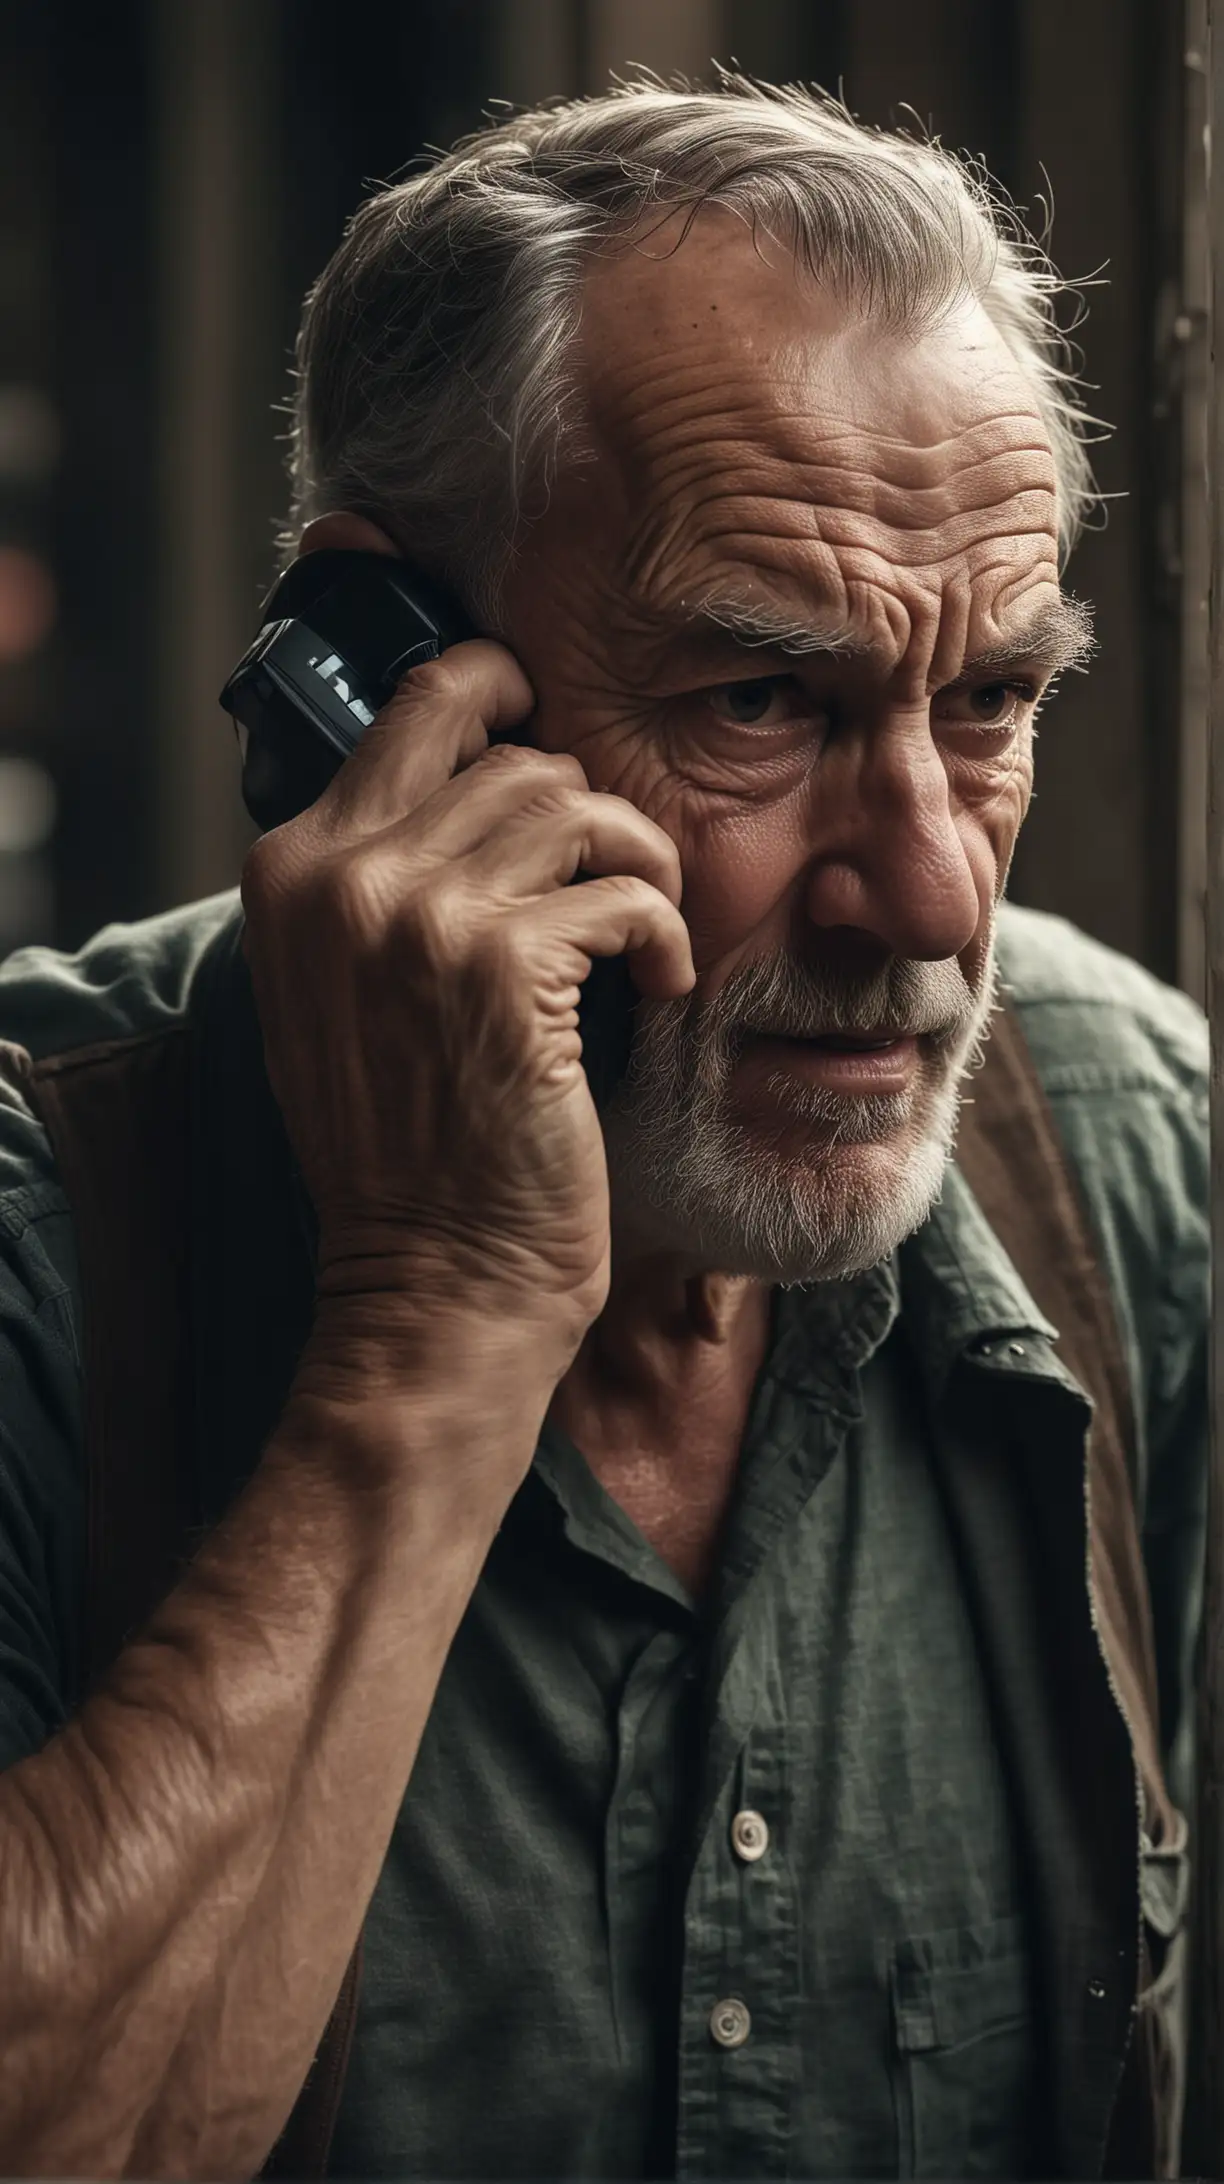 Muscular Old Man Talking on Cell Phone in Urban Noir Setting